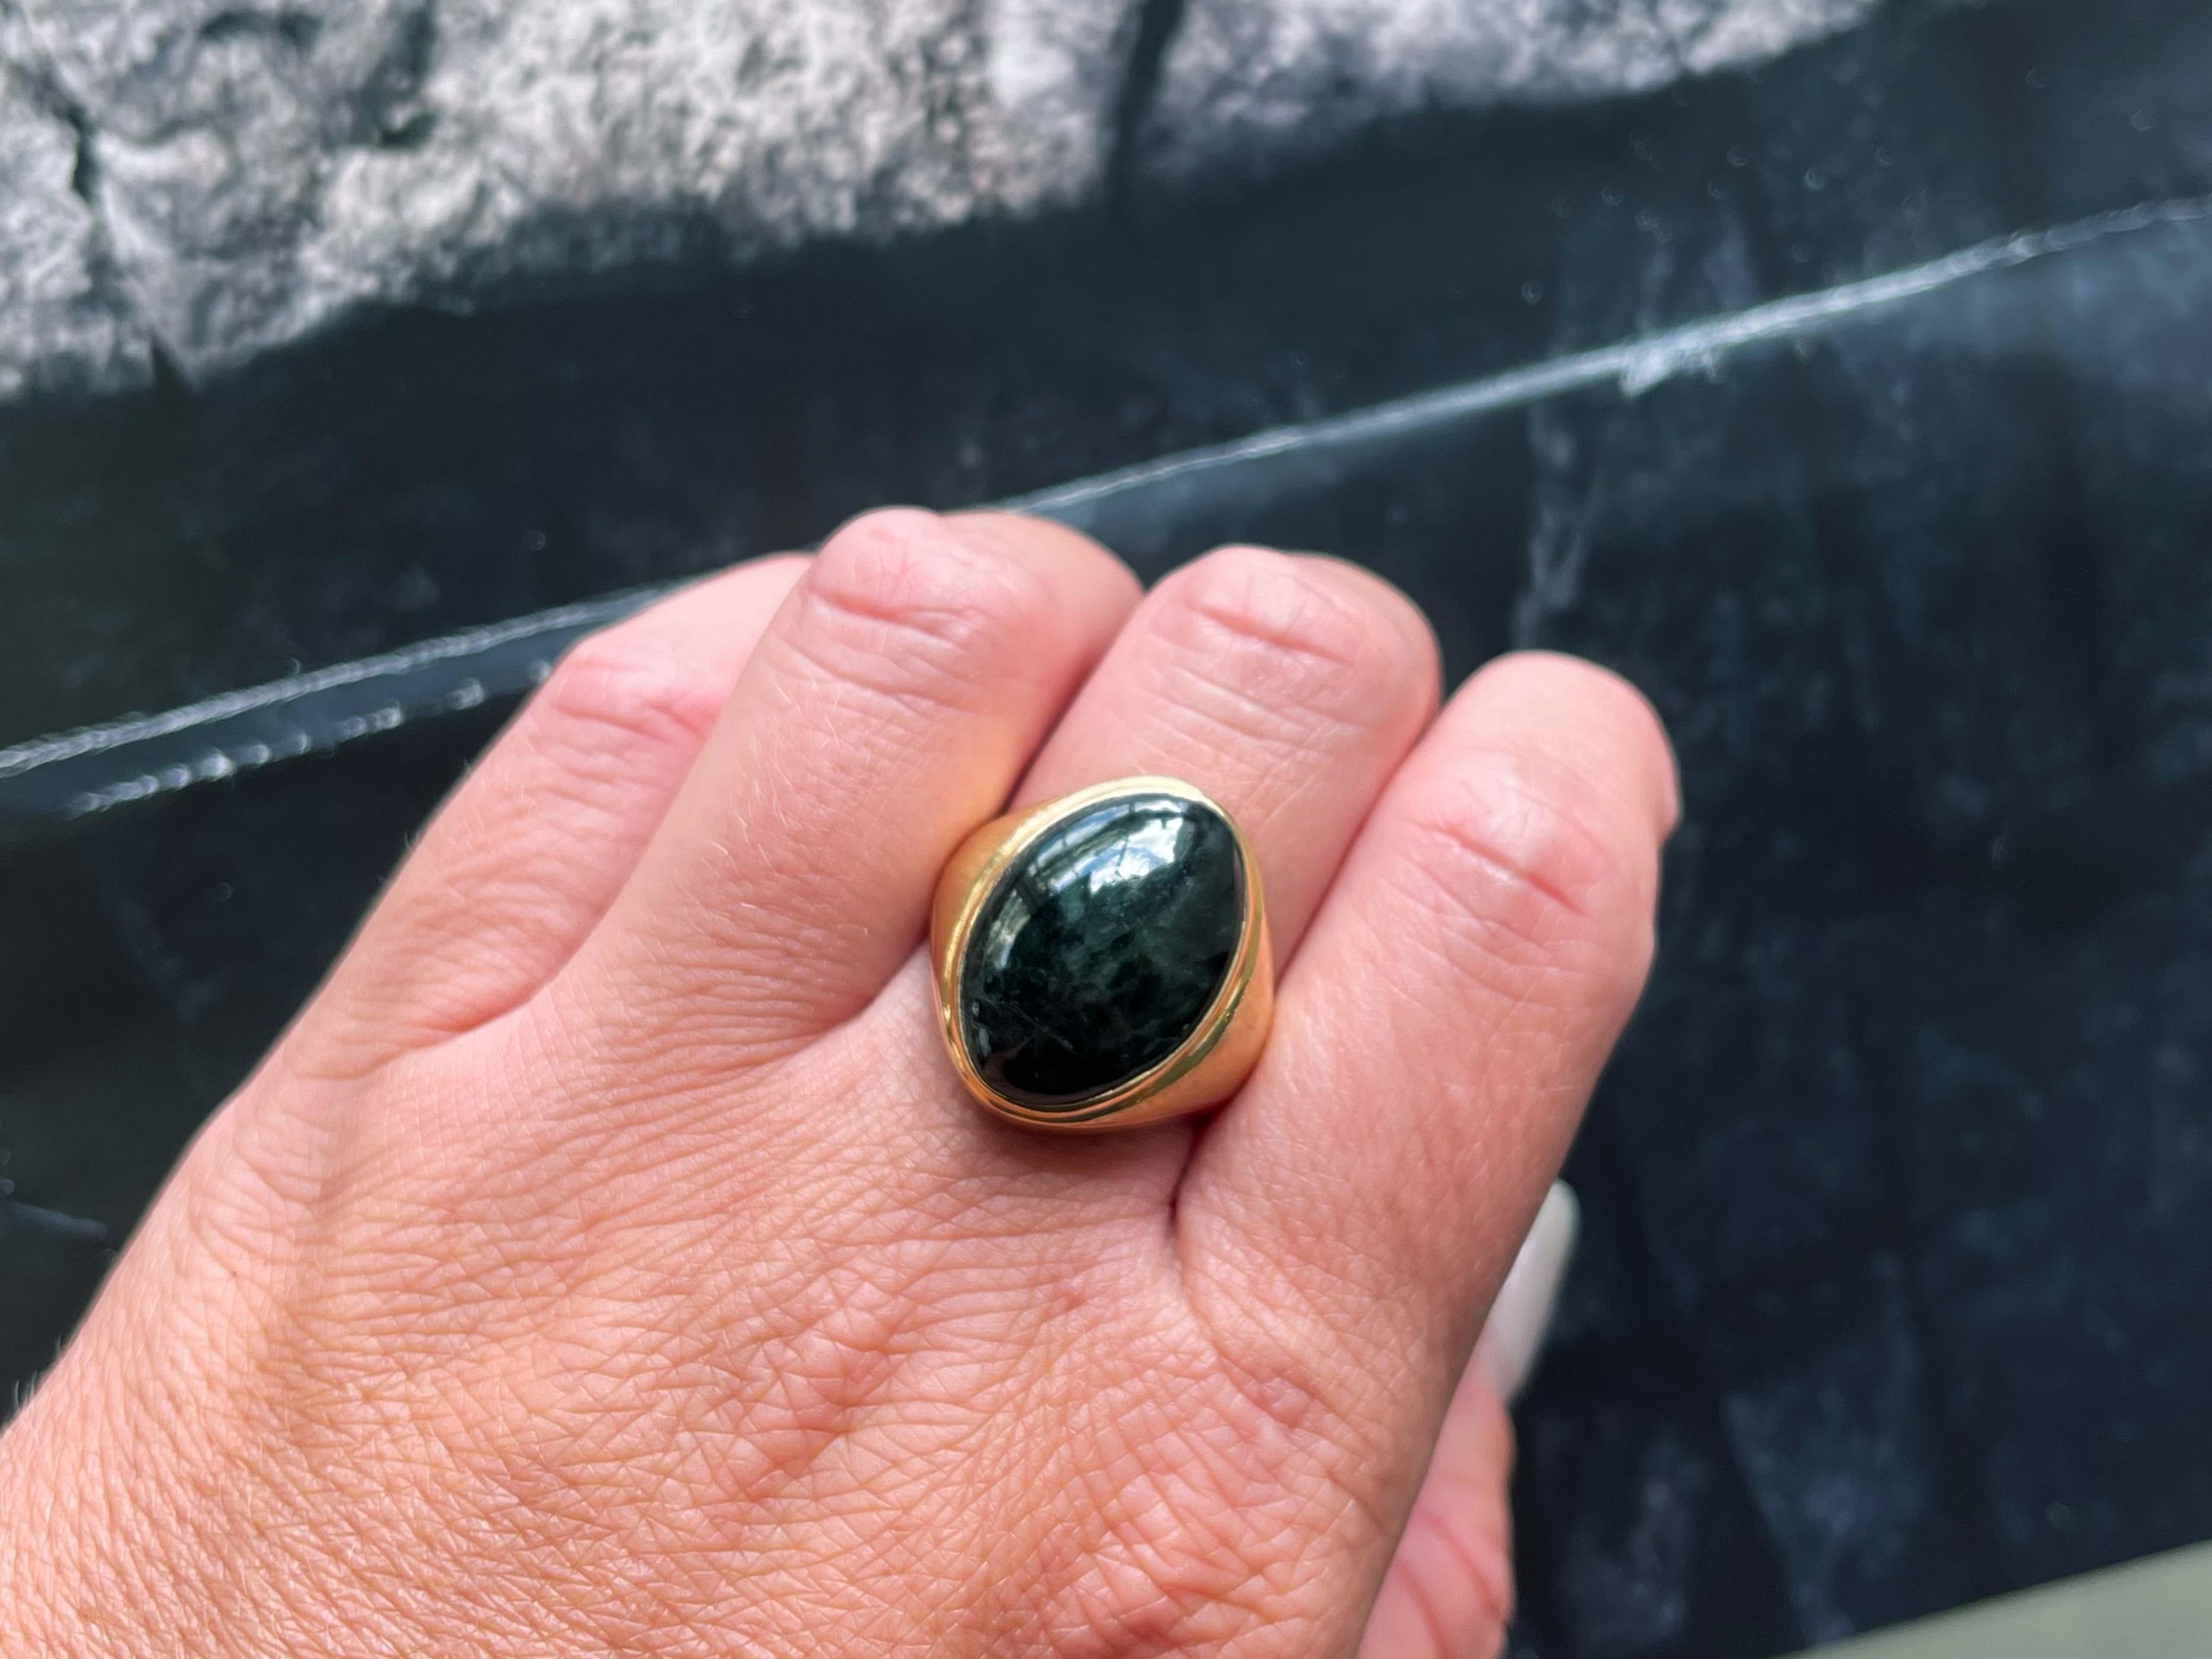 Item Specifications:

Metal: 14K Yellow Gold

Style: Statement Ring

Ring Size: 10 (resizing available for a fee)

Total Weight: 8.2 Grams

Gemstone Specifications:

Center Gemstone: Jade

Shape: Oval

Color: Black

Cut: Cabochon 

Gemstone